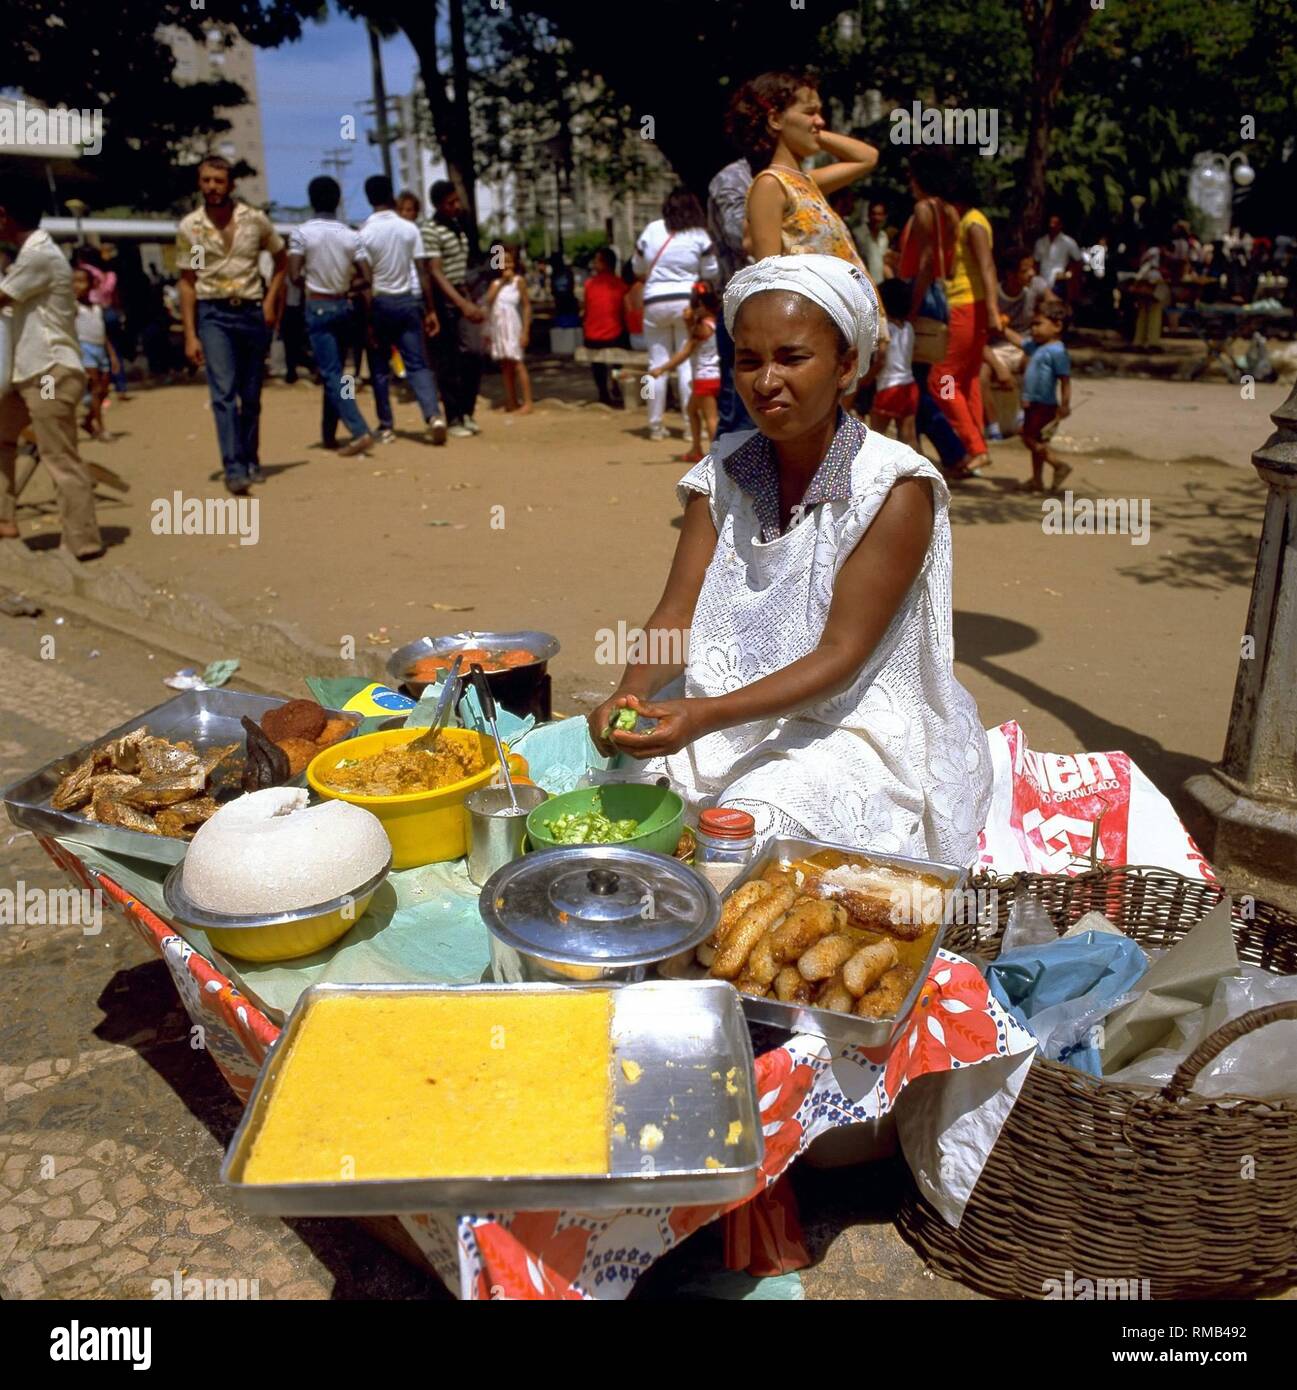 A woman sells local specialties at the flea market in Salvador. Stock Photo